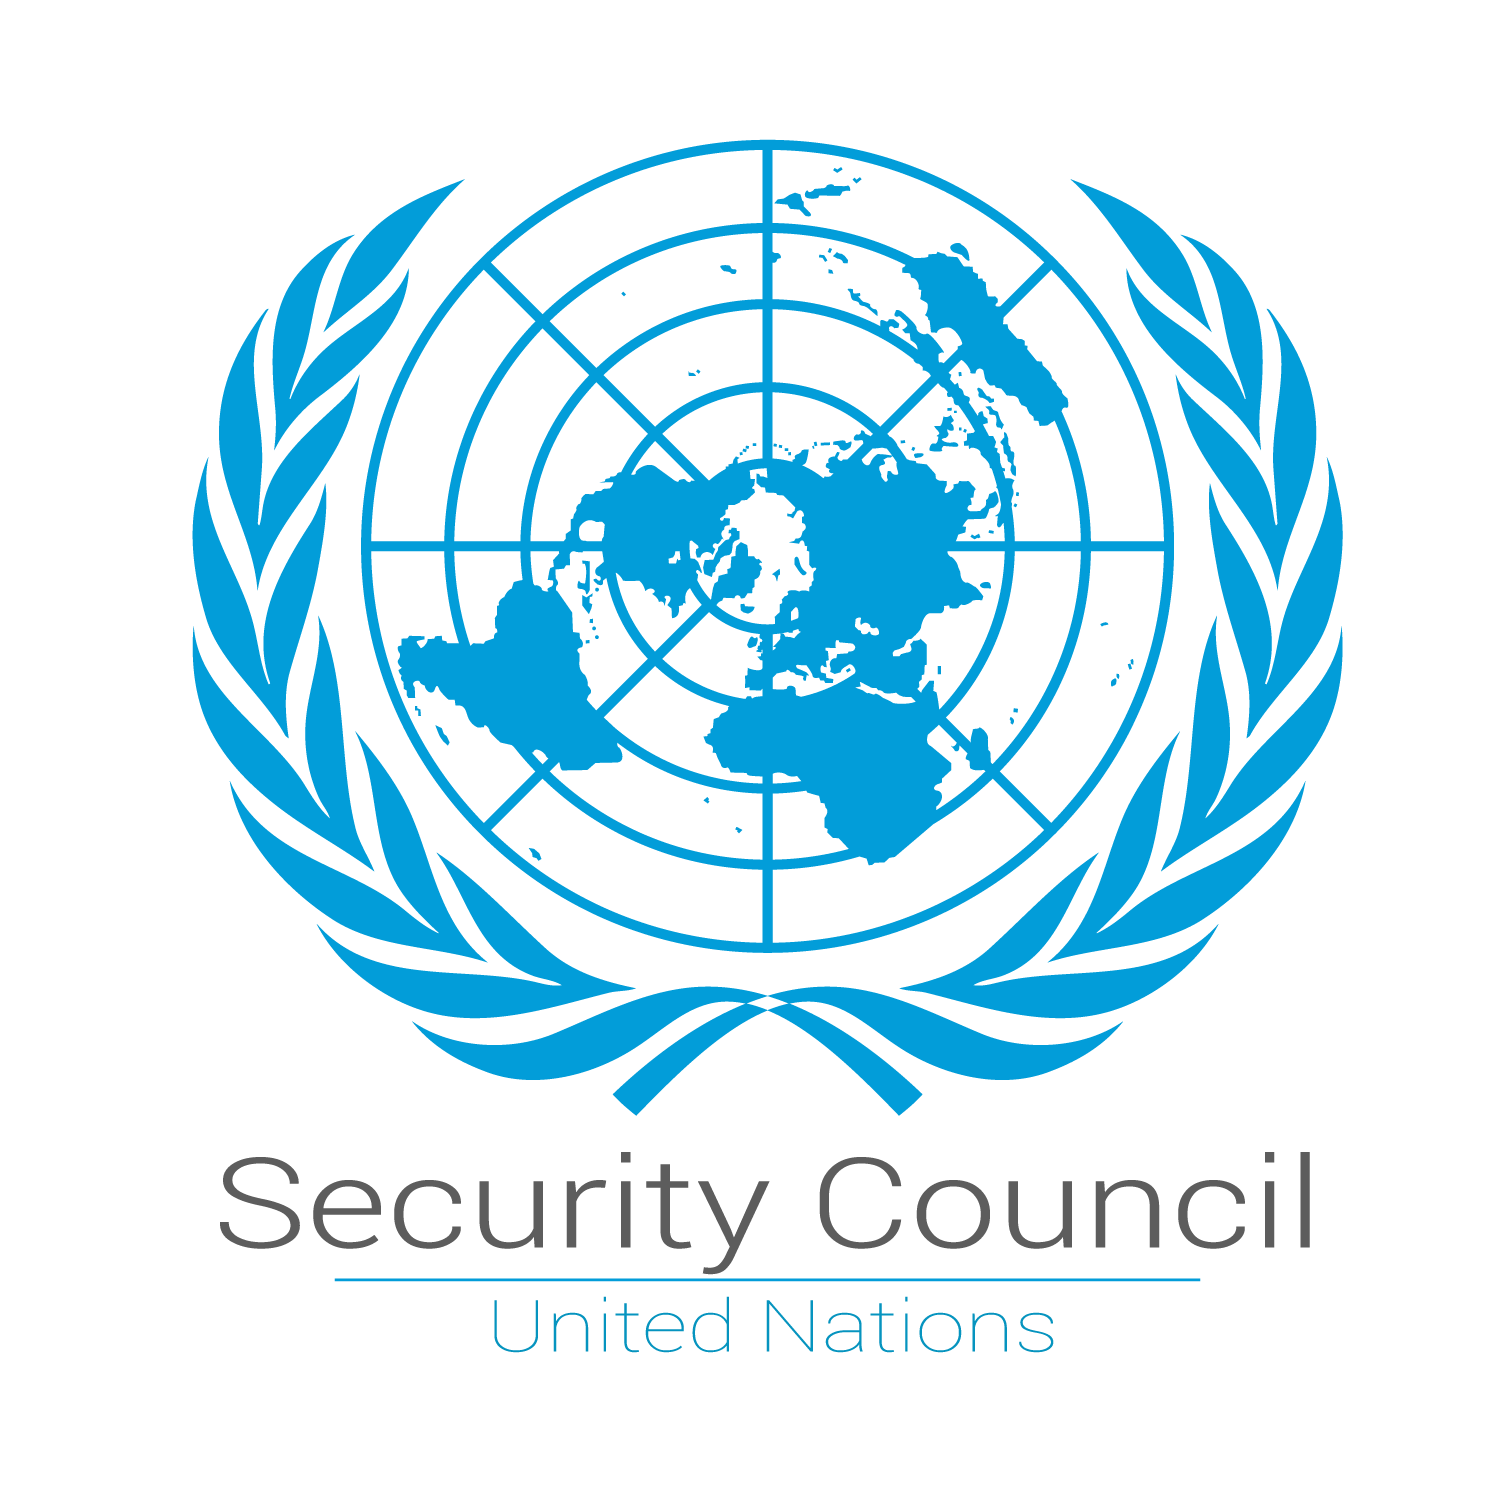 United Nations Security Council Logo - Security Council - BME Model United Nations Conference - BMEMUN